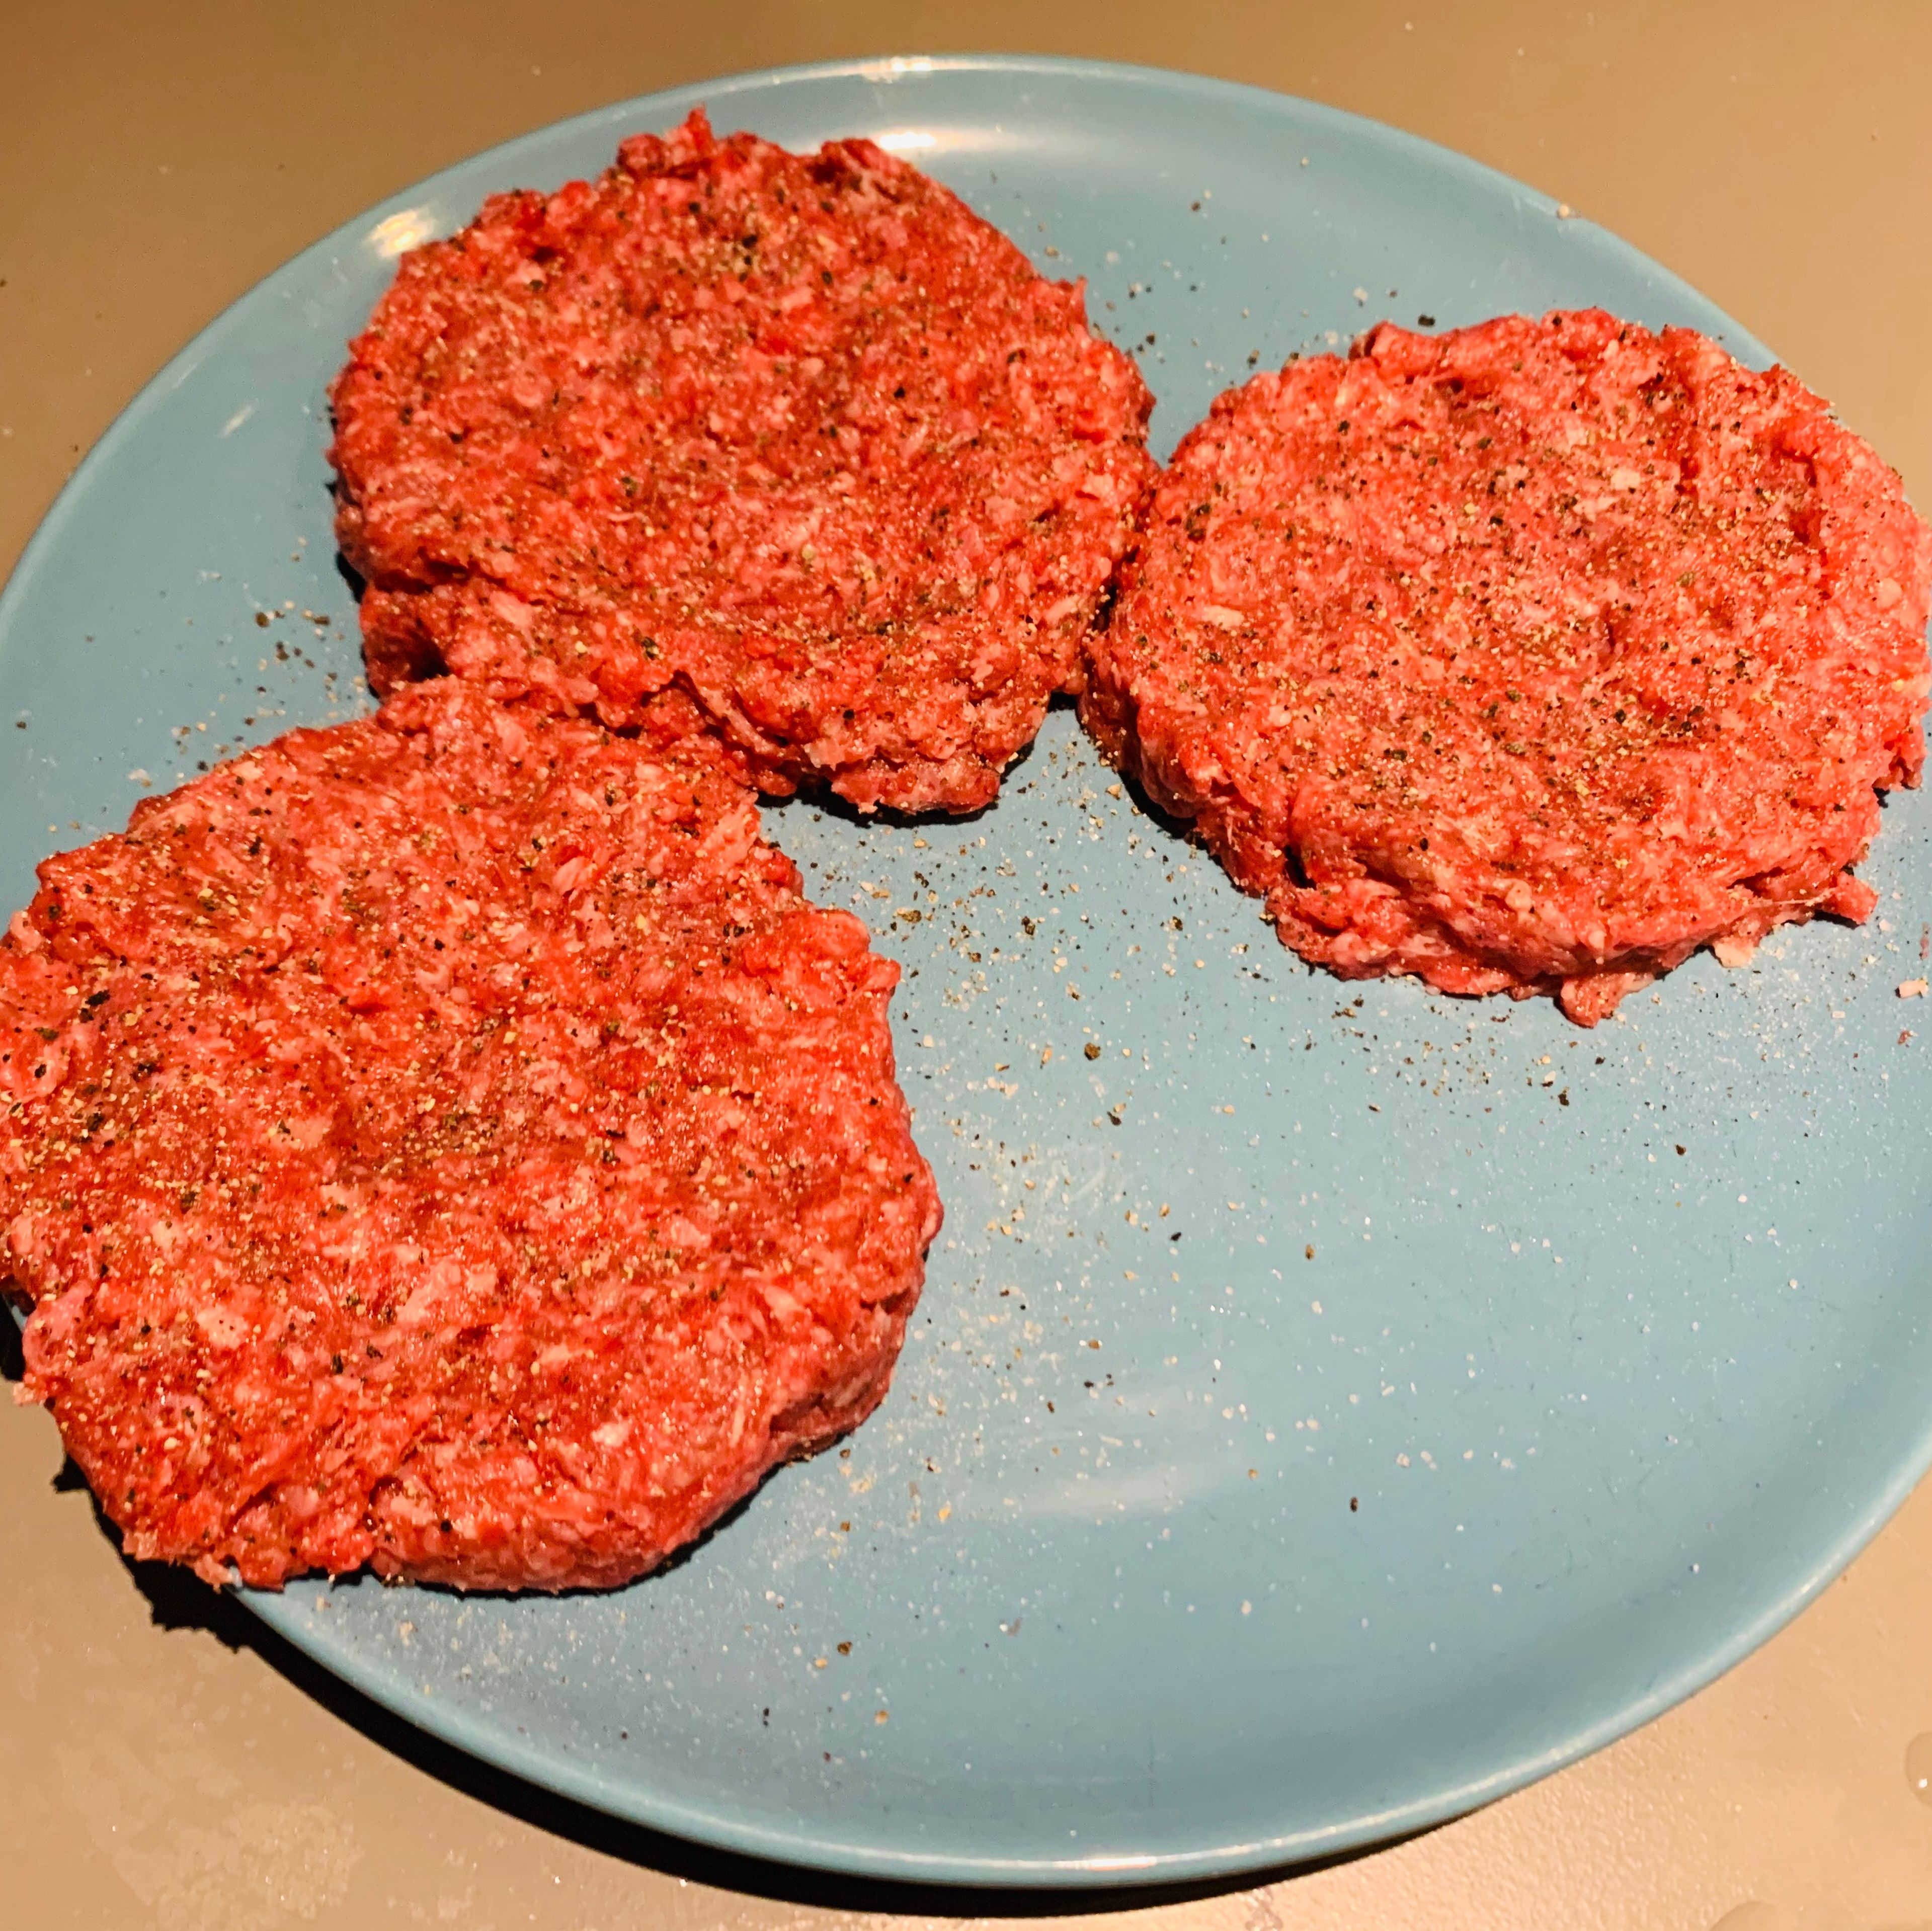 Make sure your ground beef is high fat and at least 80/20 meat/fat. Very important tip to keep in mind is don’t go hard on the beef while forming the burger, avoid pressing the meat, we want to keep it light and has some air ways inside! Season the meat with salt and pepper, season both sides, don’t go nice and gentle be generous with the salt and pepper. You will need to separate the meet into equal serving sizes, i use a scale for this. After that put those burgers into the fridge (20 mins)